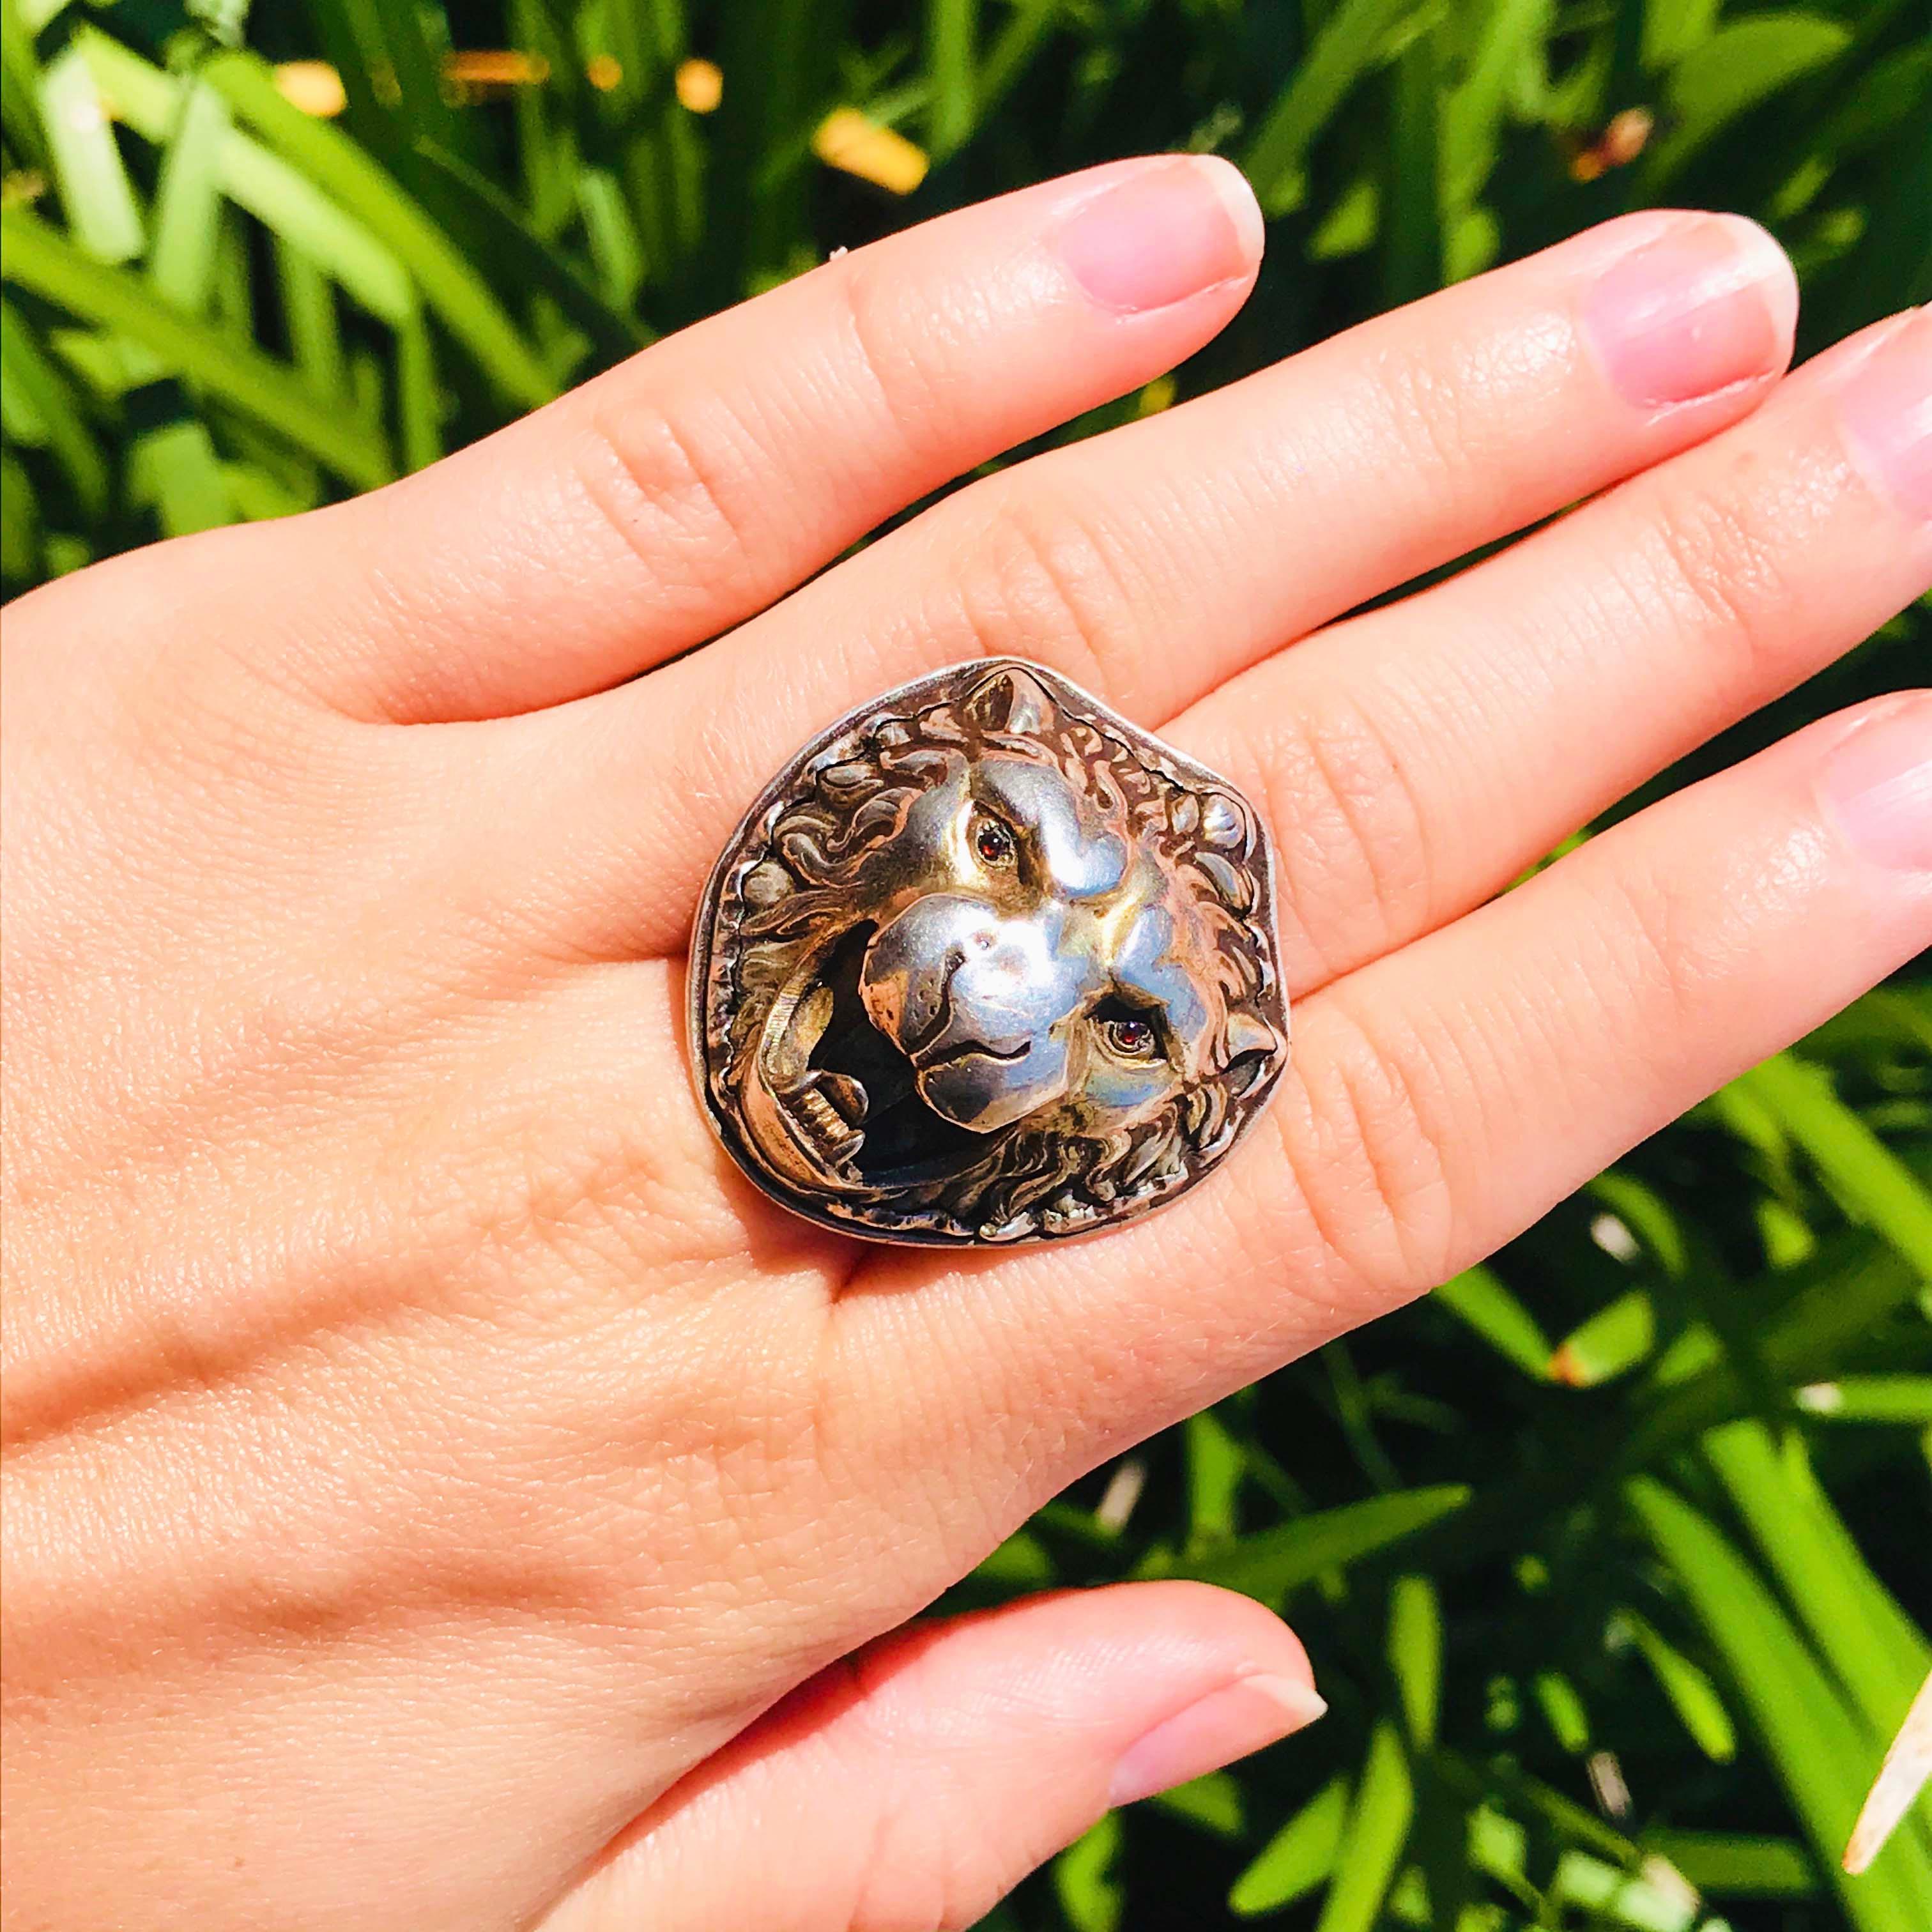 This Victorian/Edwardian Powerful Lion Ring is incredible! The antique sterling lion ring is intricate and detail oriented! The top of the ring has the most gorgeous handmade lion head with ruby eyes. The entire piece has all of the original metal